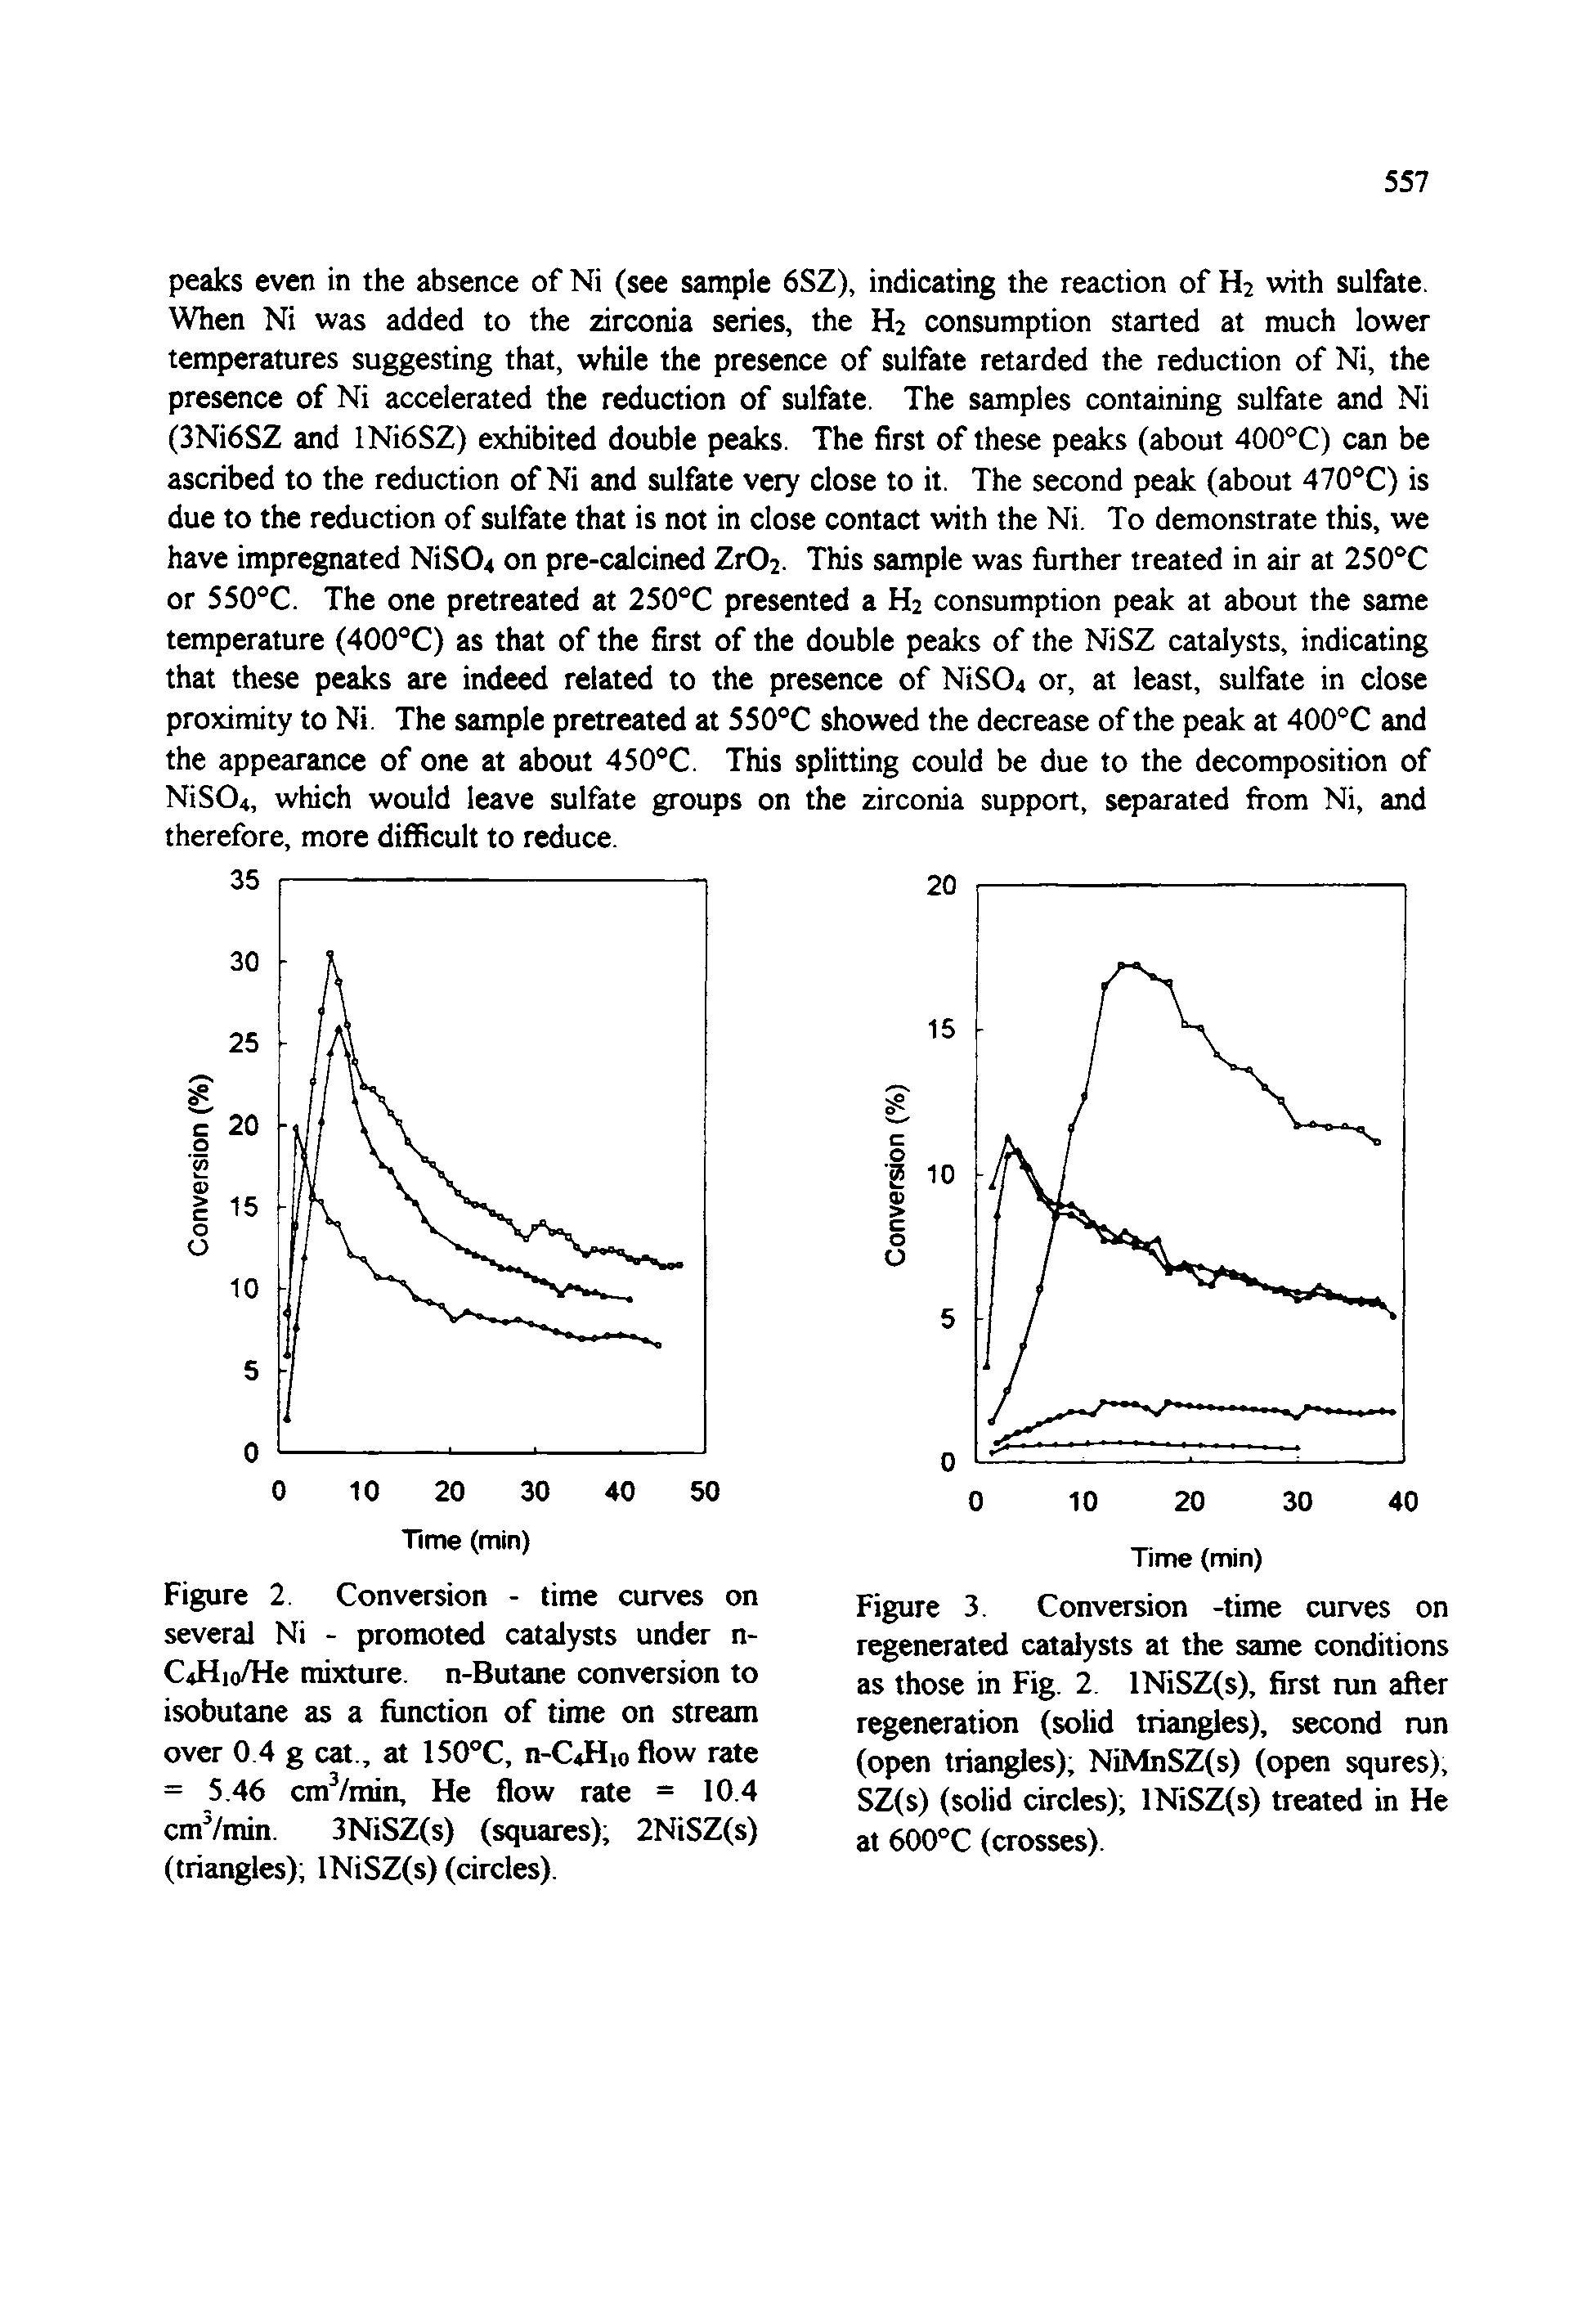 Figure 2 Conversion - time curves on several Ni - promoted catalysts under n-C4Hio/He mixture. n-Butane conversion to isobutane as a function of time on stream over 0 4 g cat., at 150°C, n-C4Hio flow rate = 5.46 cmVmin, He flow rate = 10.4 cm7min. 3NiSZ(s) (squares) 2NiSZ(s) (triangles) INiSZ(s) (circles).